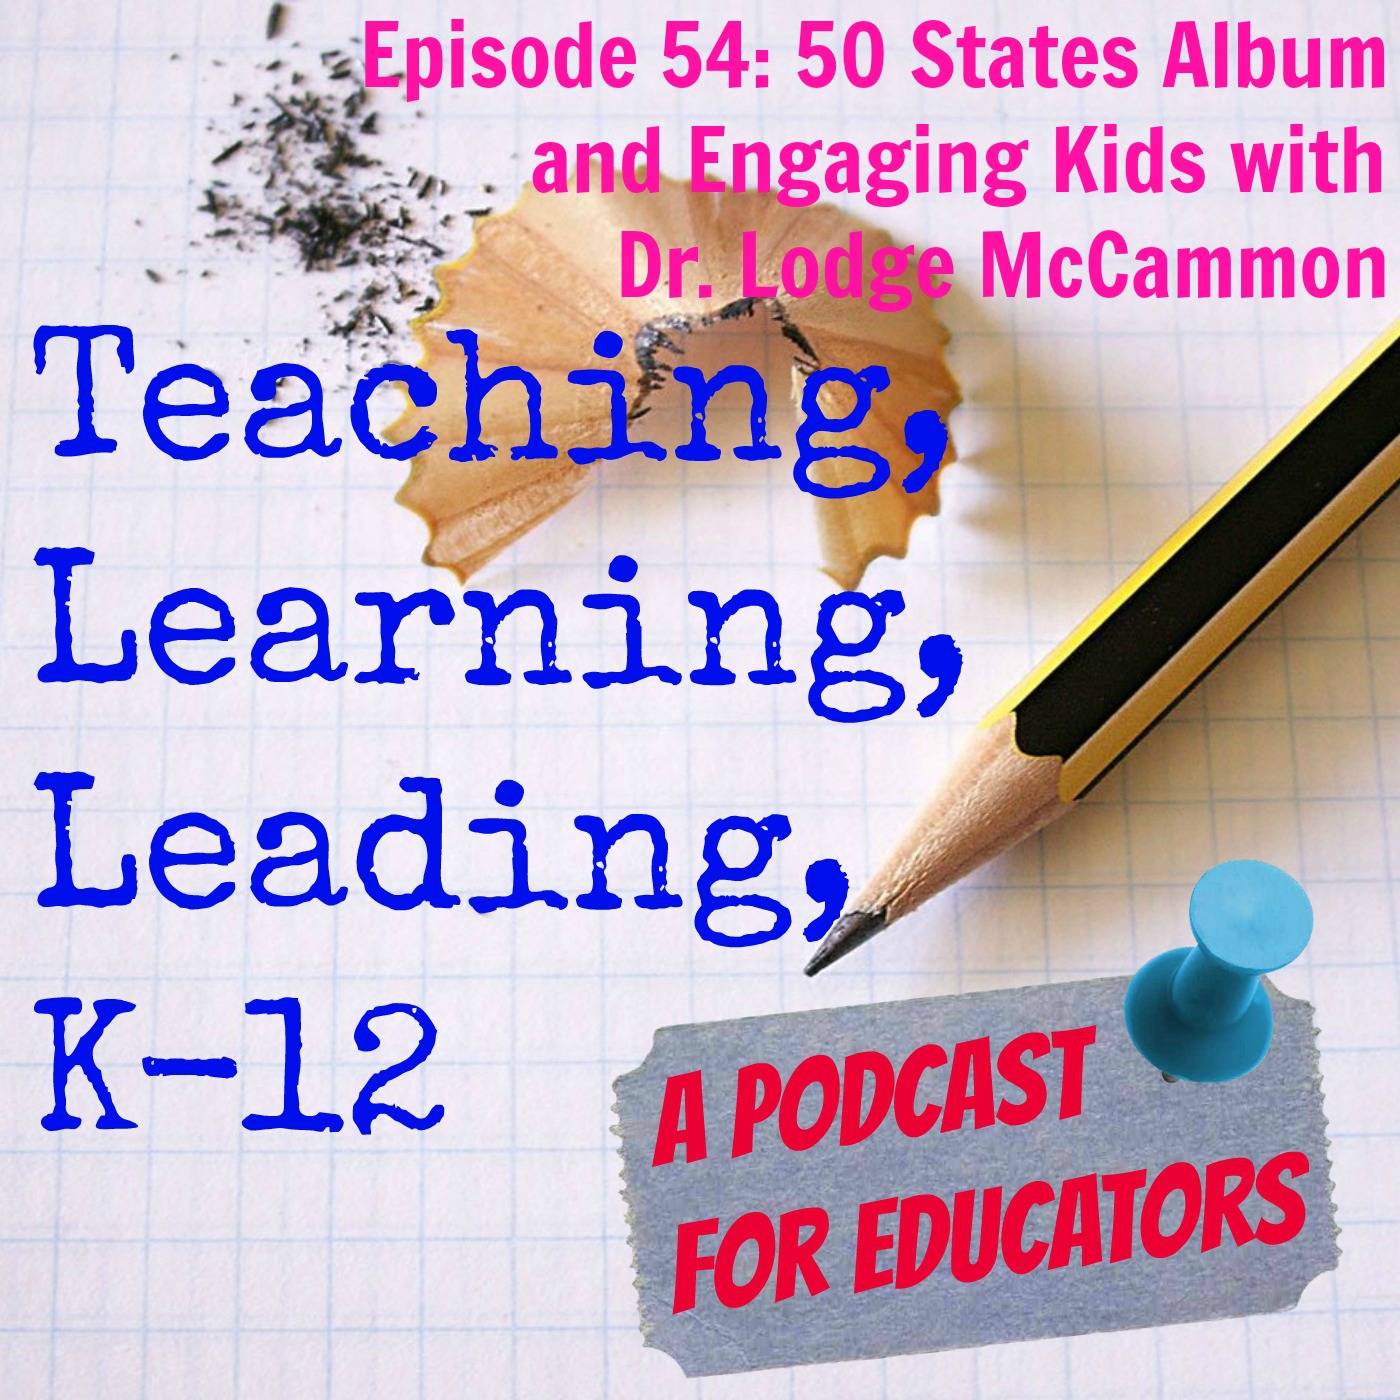 Episode 54: The 50 States Album and Engaging Kids with Dr. Lodge McCammon